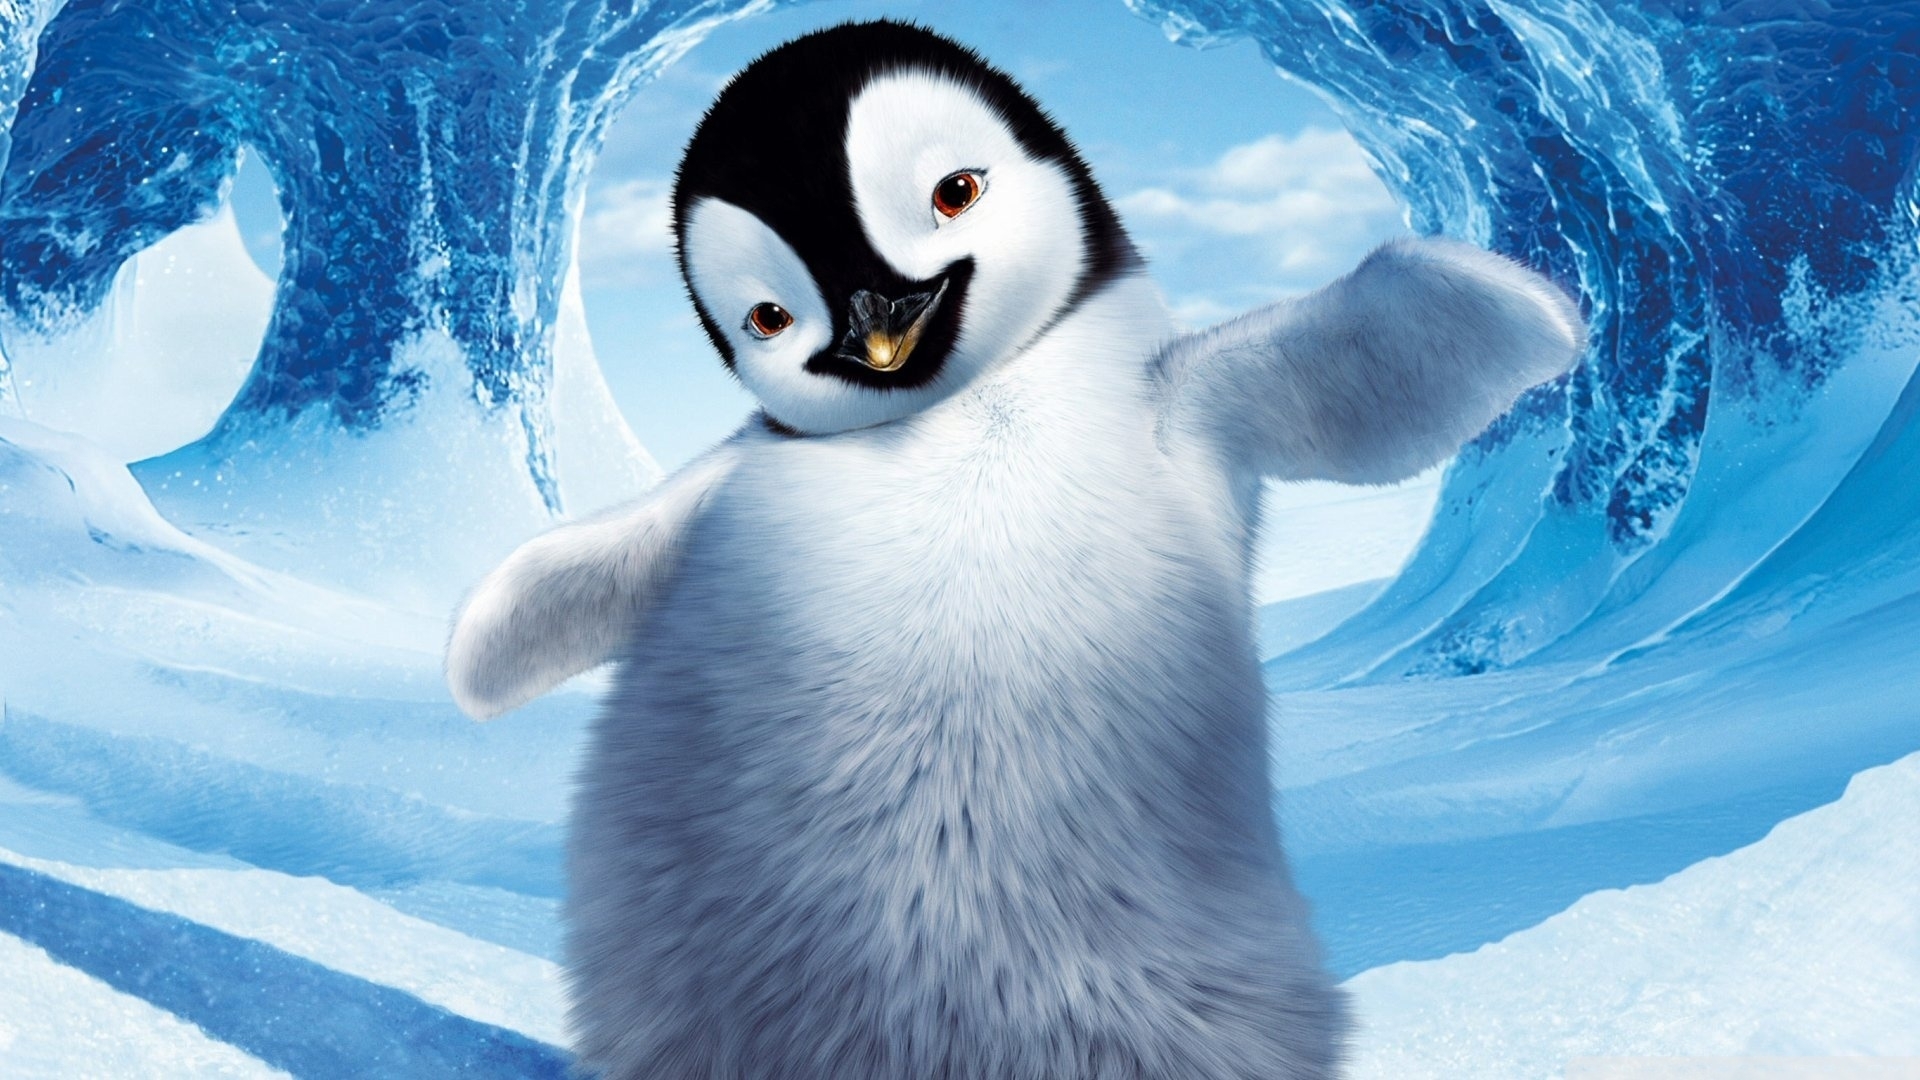 26451 download wallpaper cartoon, pinguins, blue screensavers and pictures for free